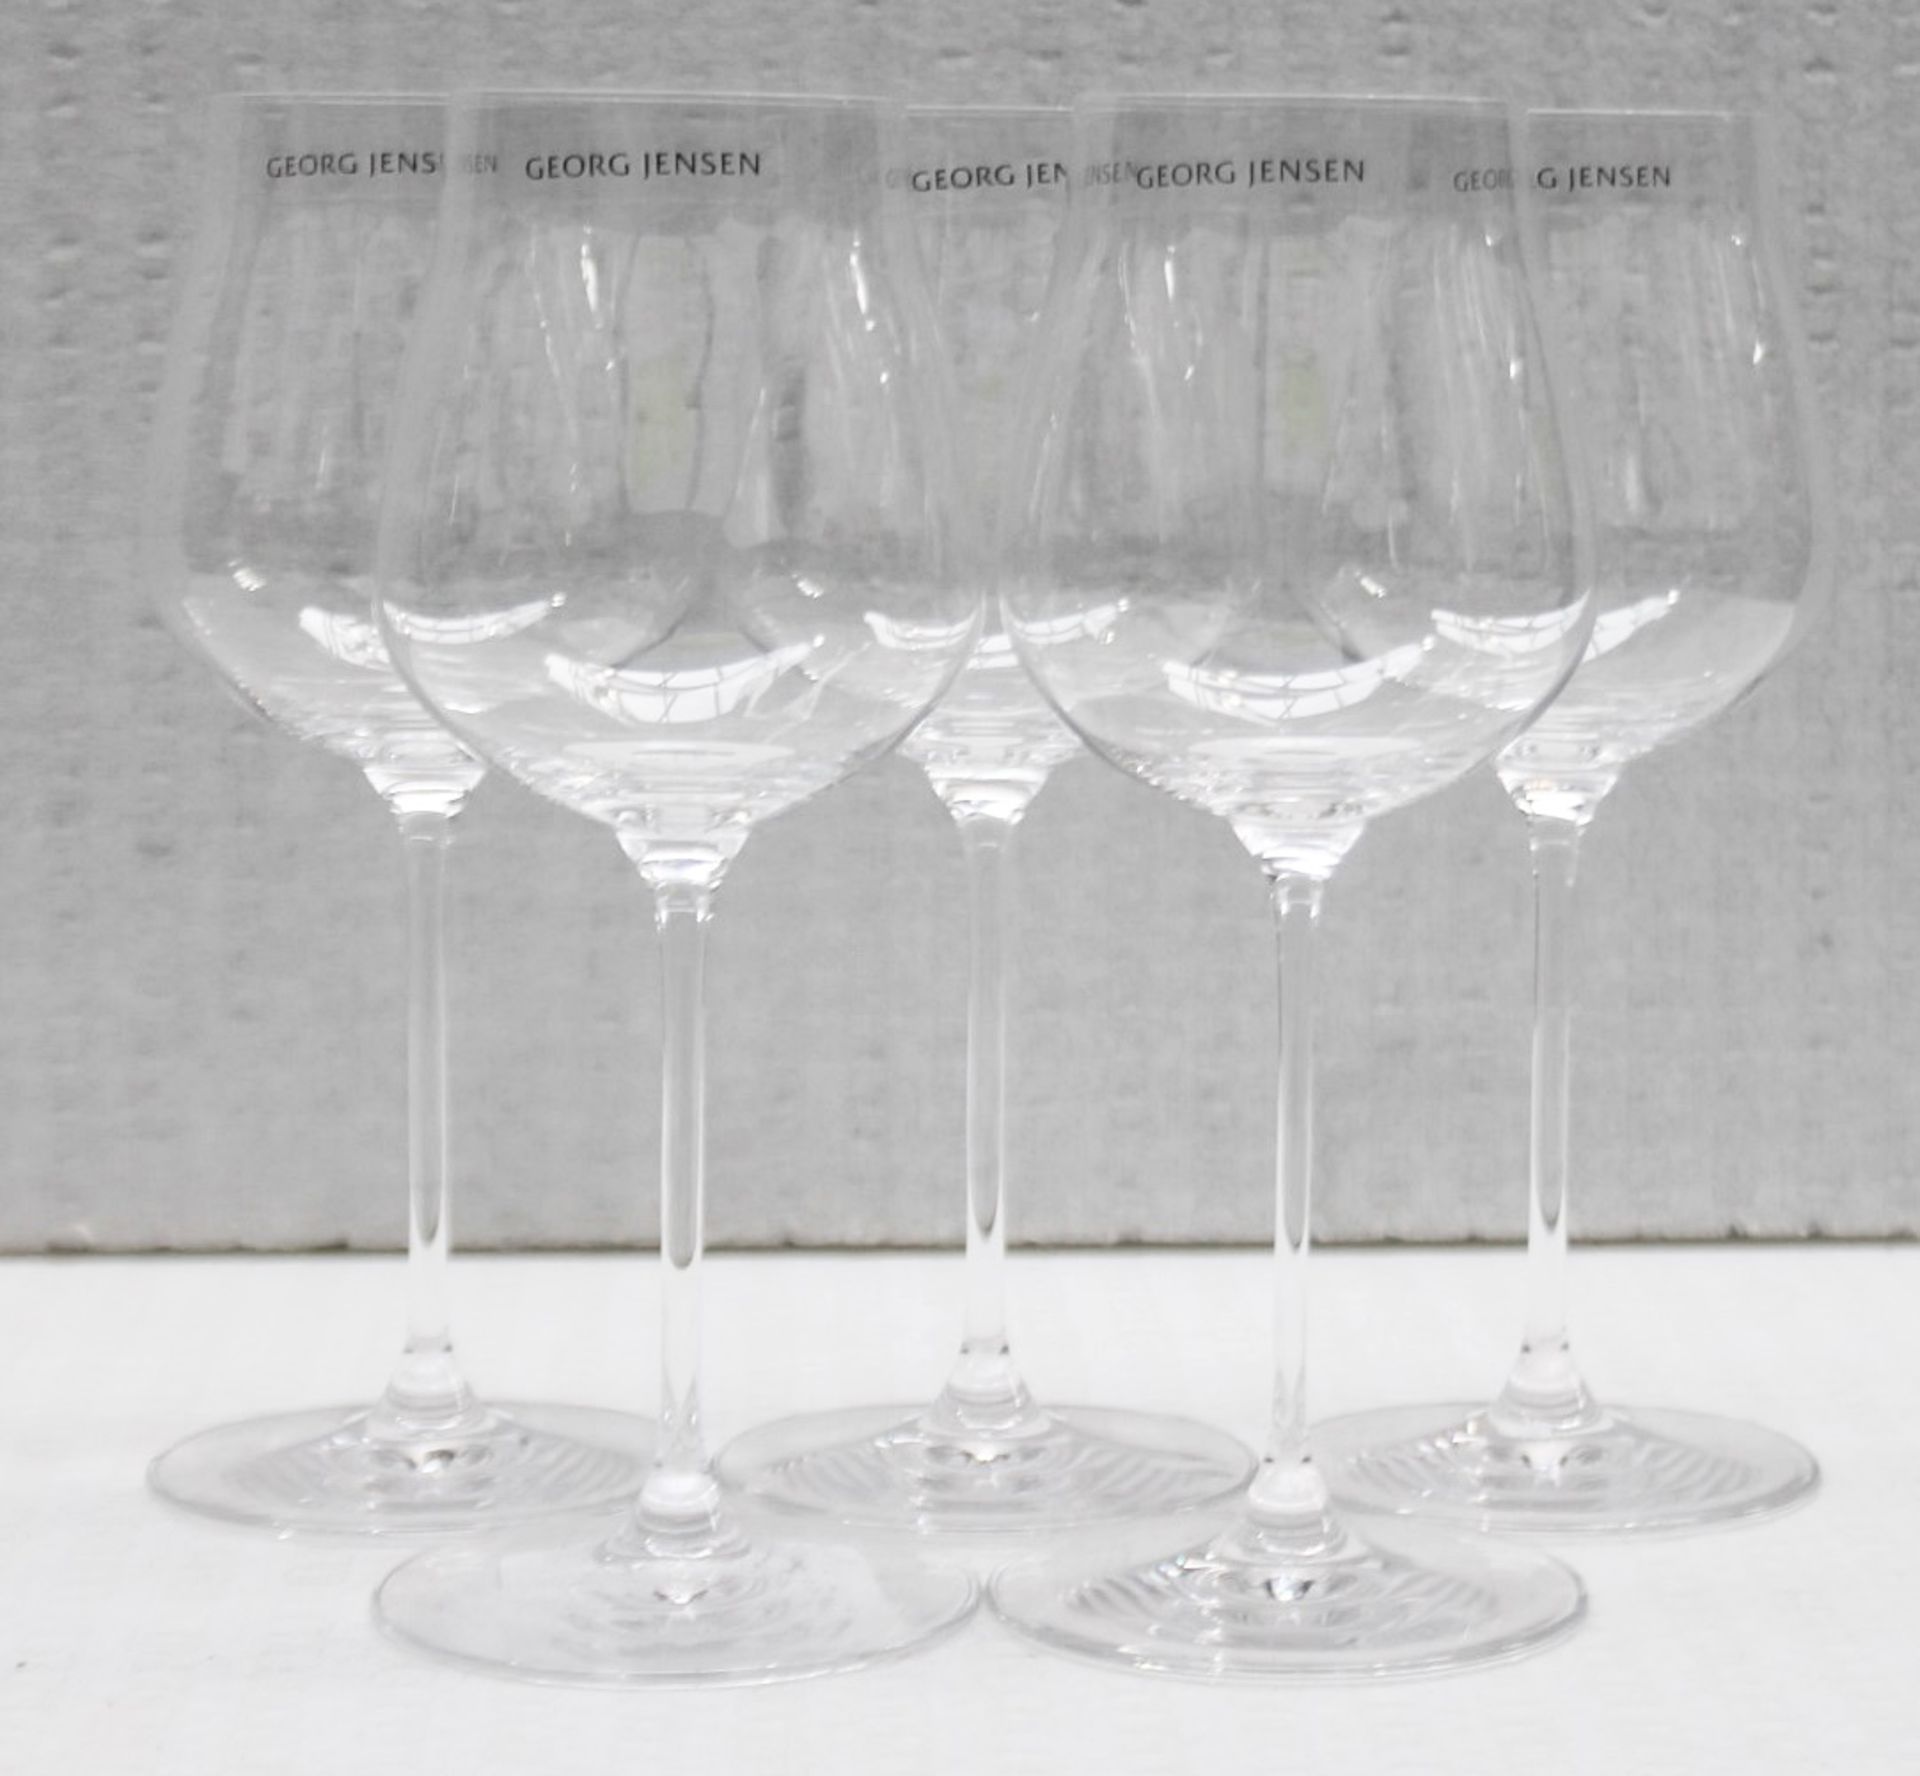 5 x GEORG JENSEN 'Sky' Crystal White Wine Glass - Ref: 6864831/HAS2157/WH2-C5/02-23-1 - CL987 - - Image 4 of 8